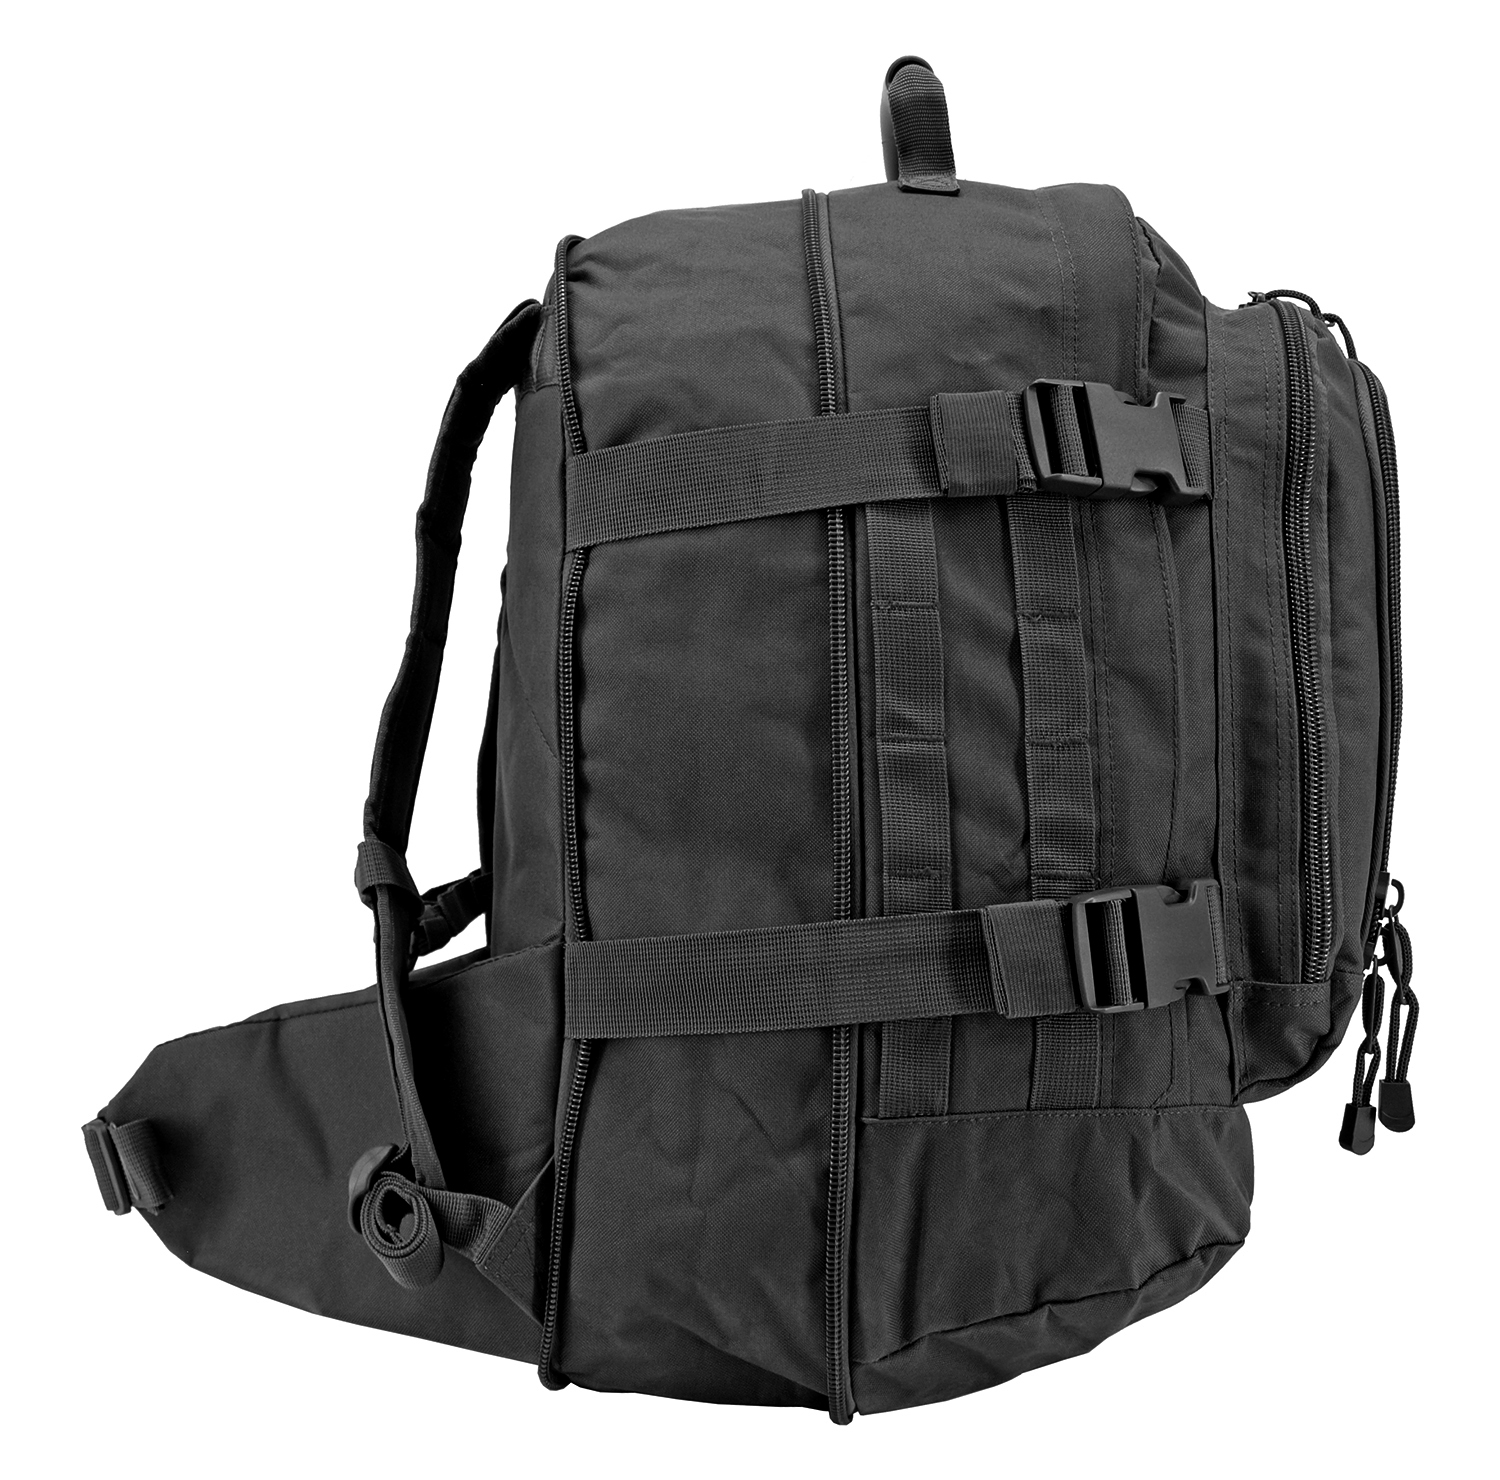 Expandable Tactical Backpack - Black